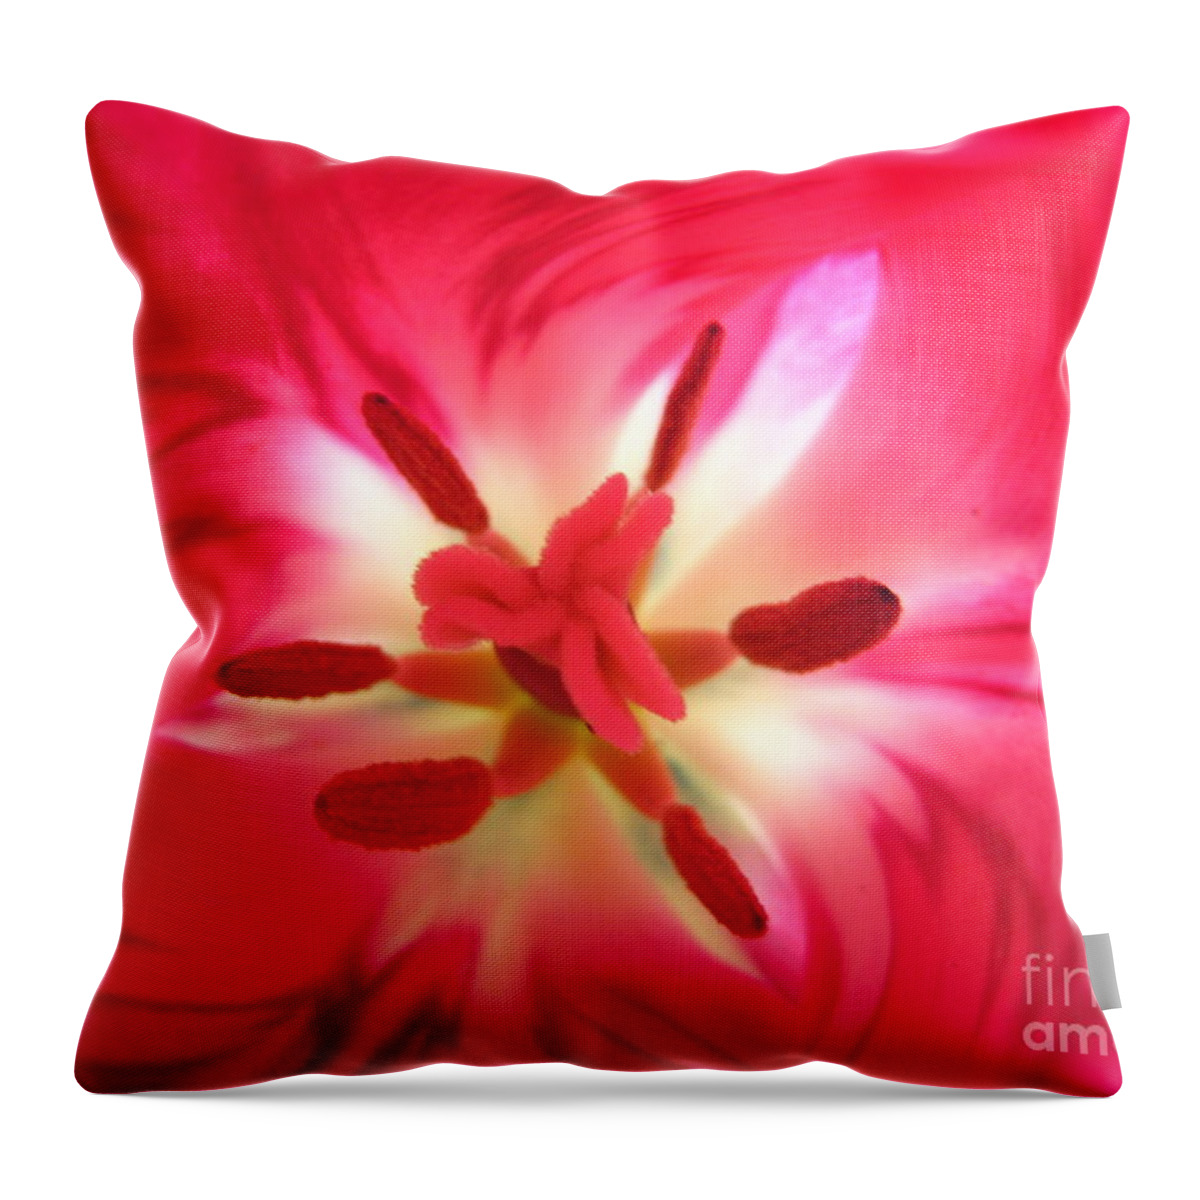 Pink Throw Pillow featuring the photograph God's Floral Canvas 1 by Jennifer E Doll